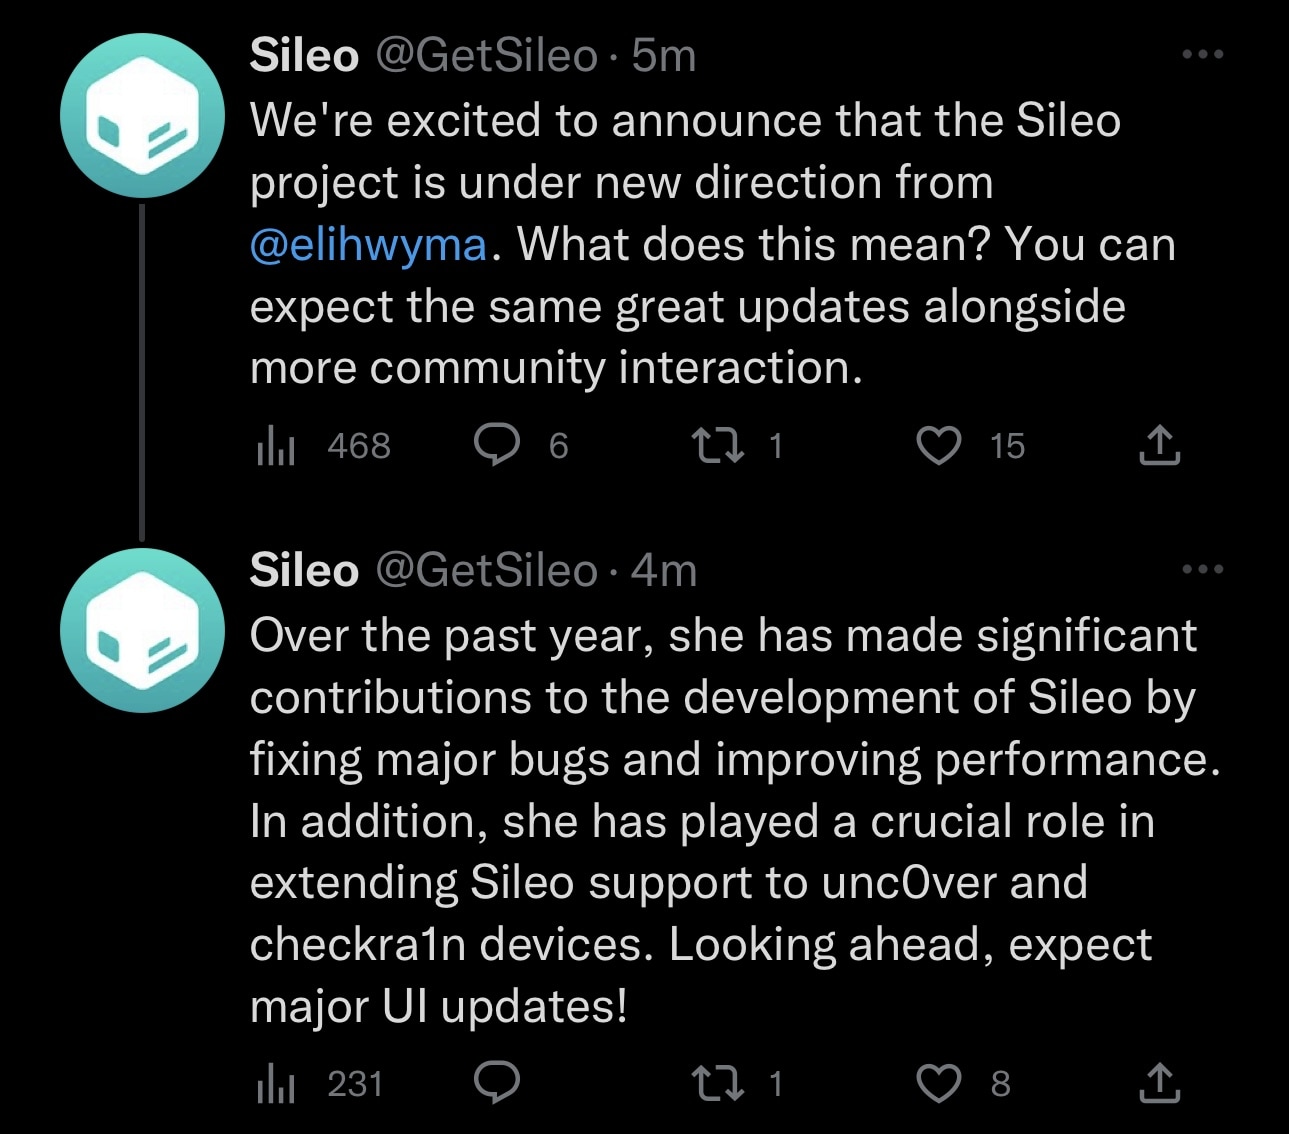 The Sileo Team announces Amy While becoming the new director of the Sileo Team on Twitter.